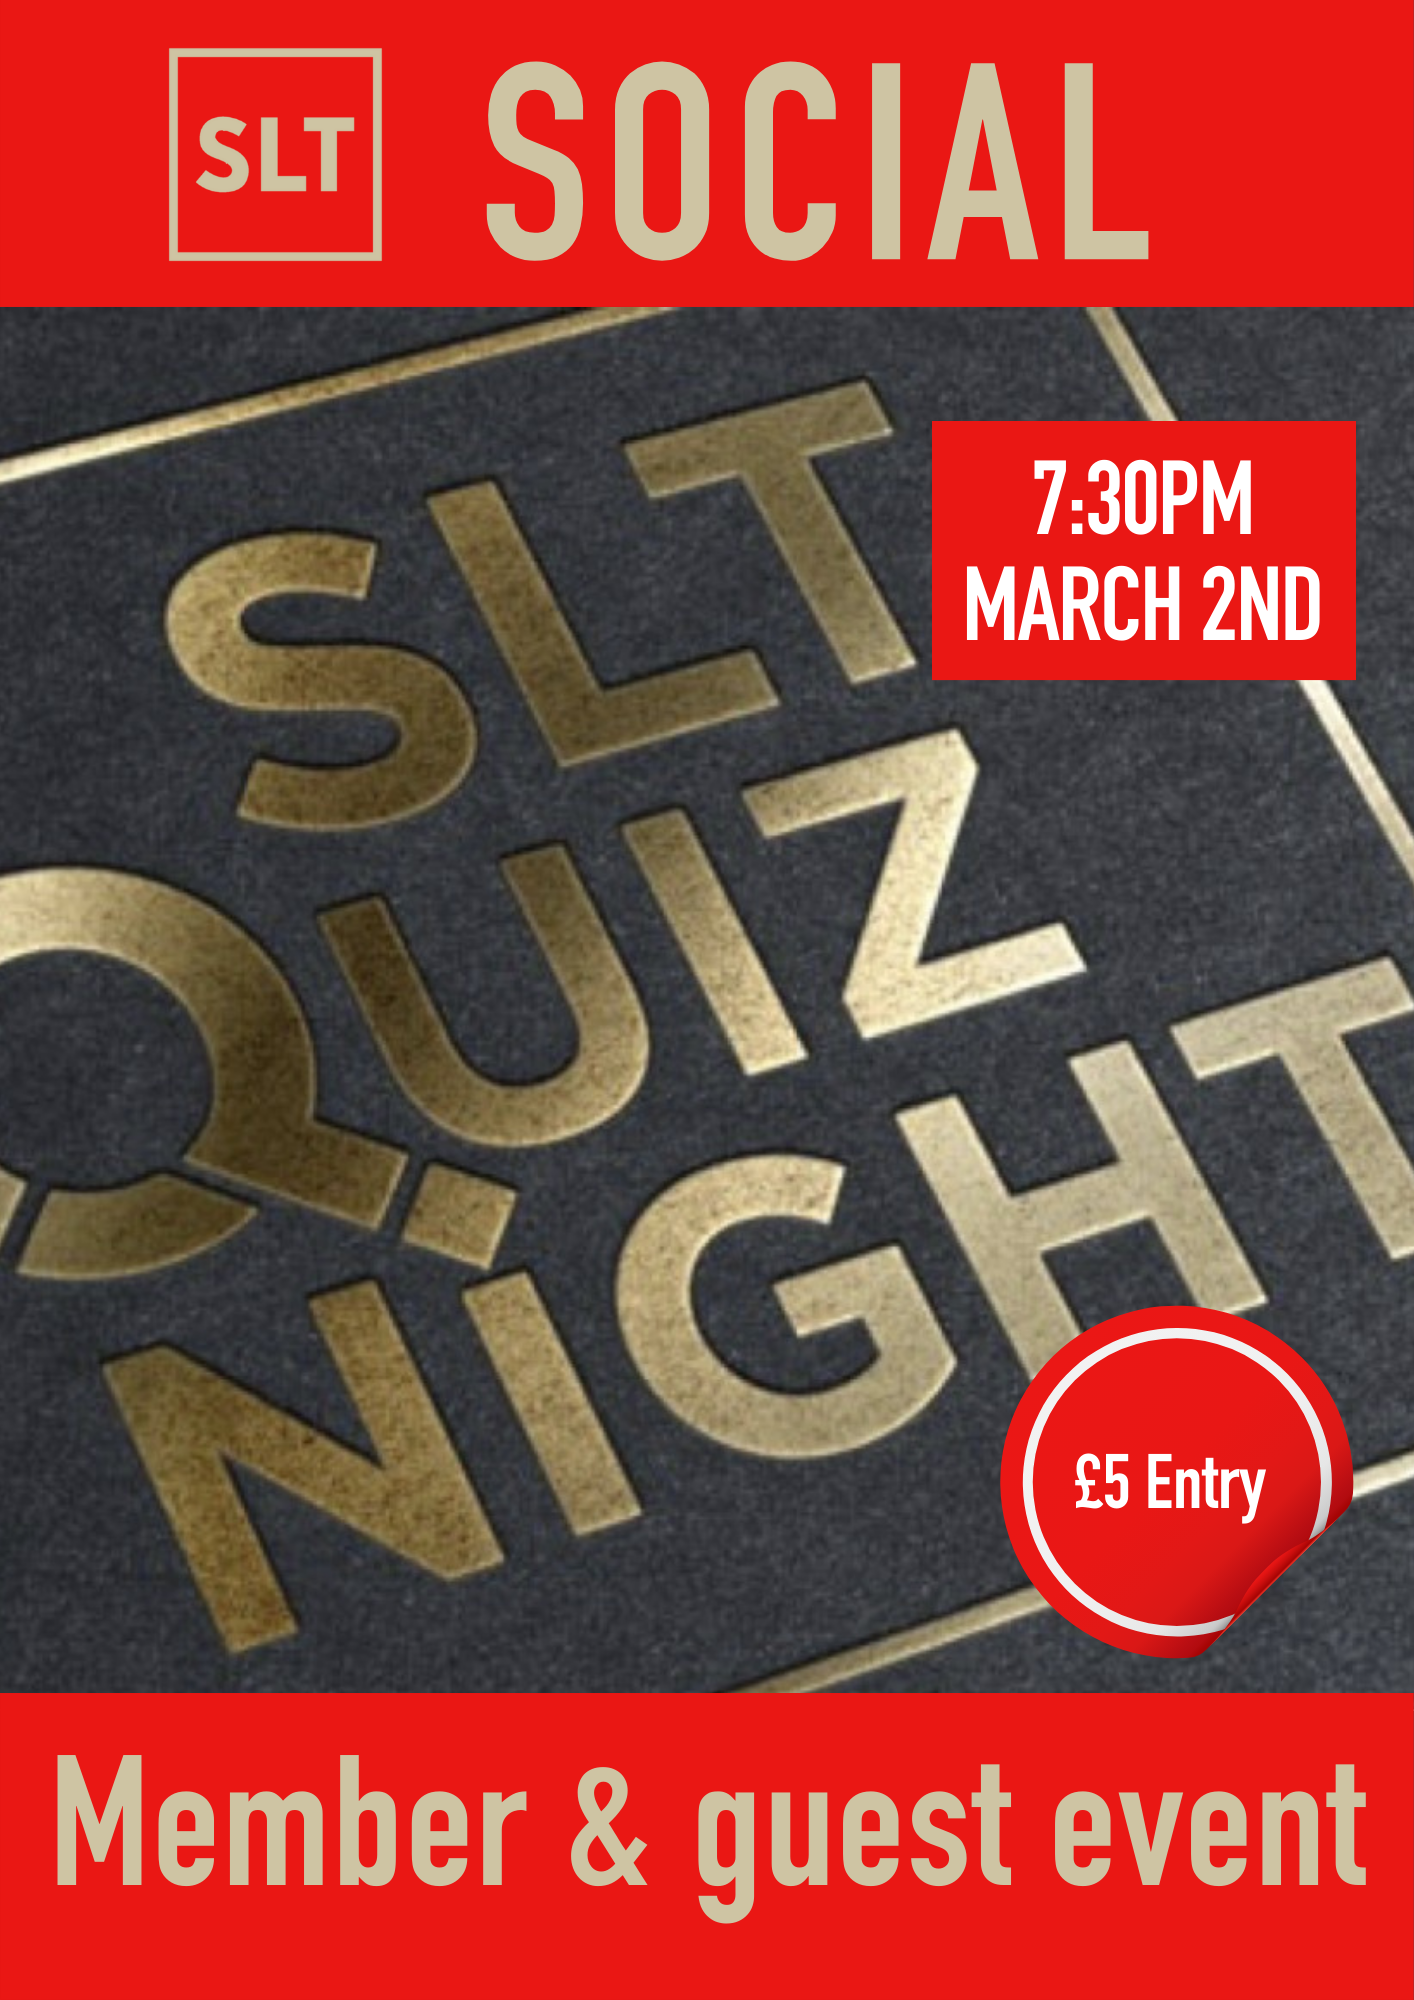 Poster image: The words "SLT quiz night" embossed in gold into a dark coloured surface.